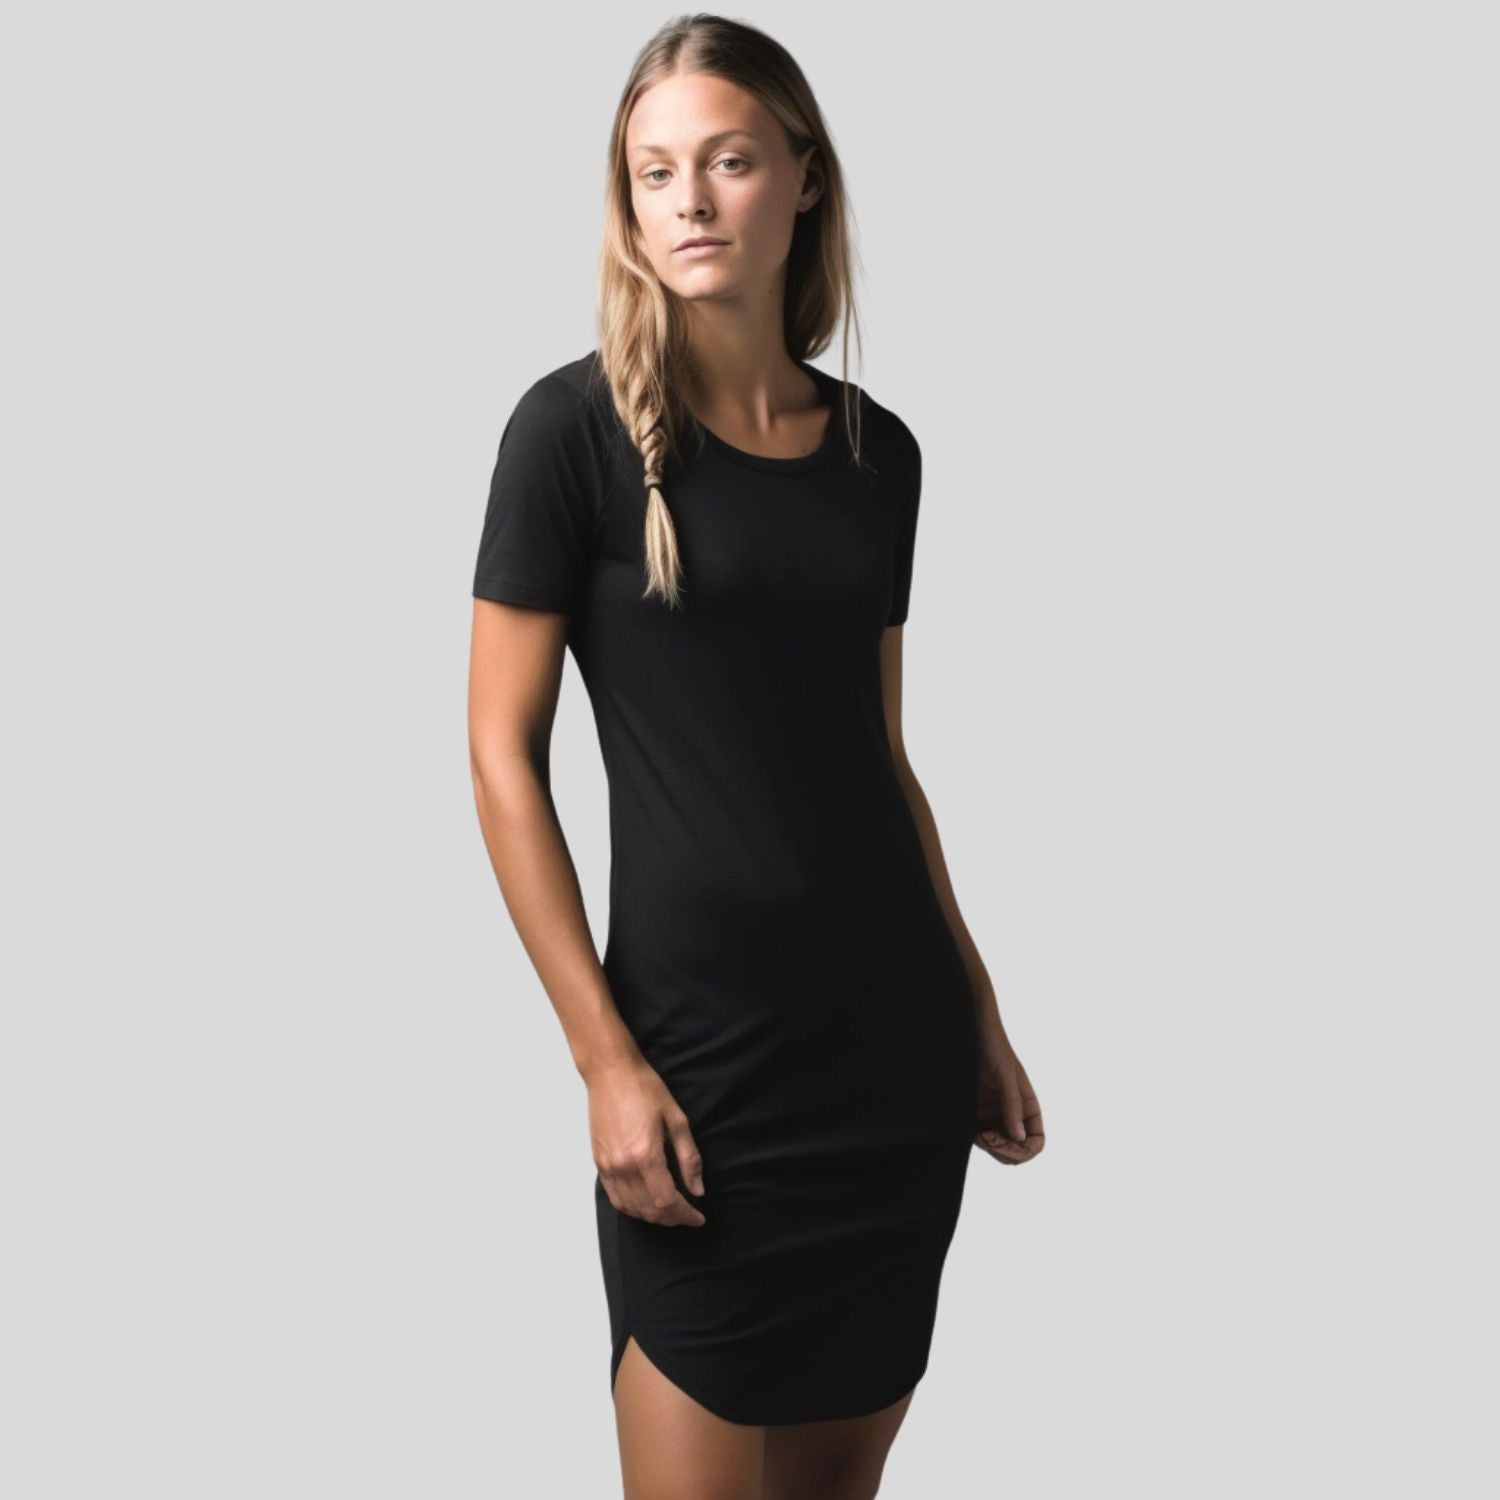 Fitted women's dress organic cotton | Shop organic dresses for